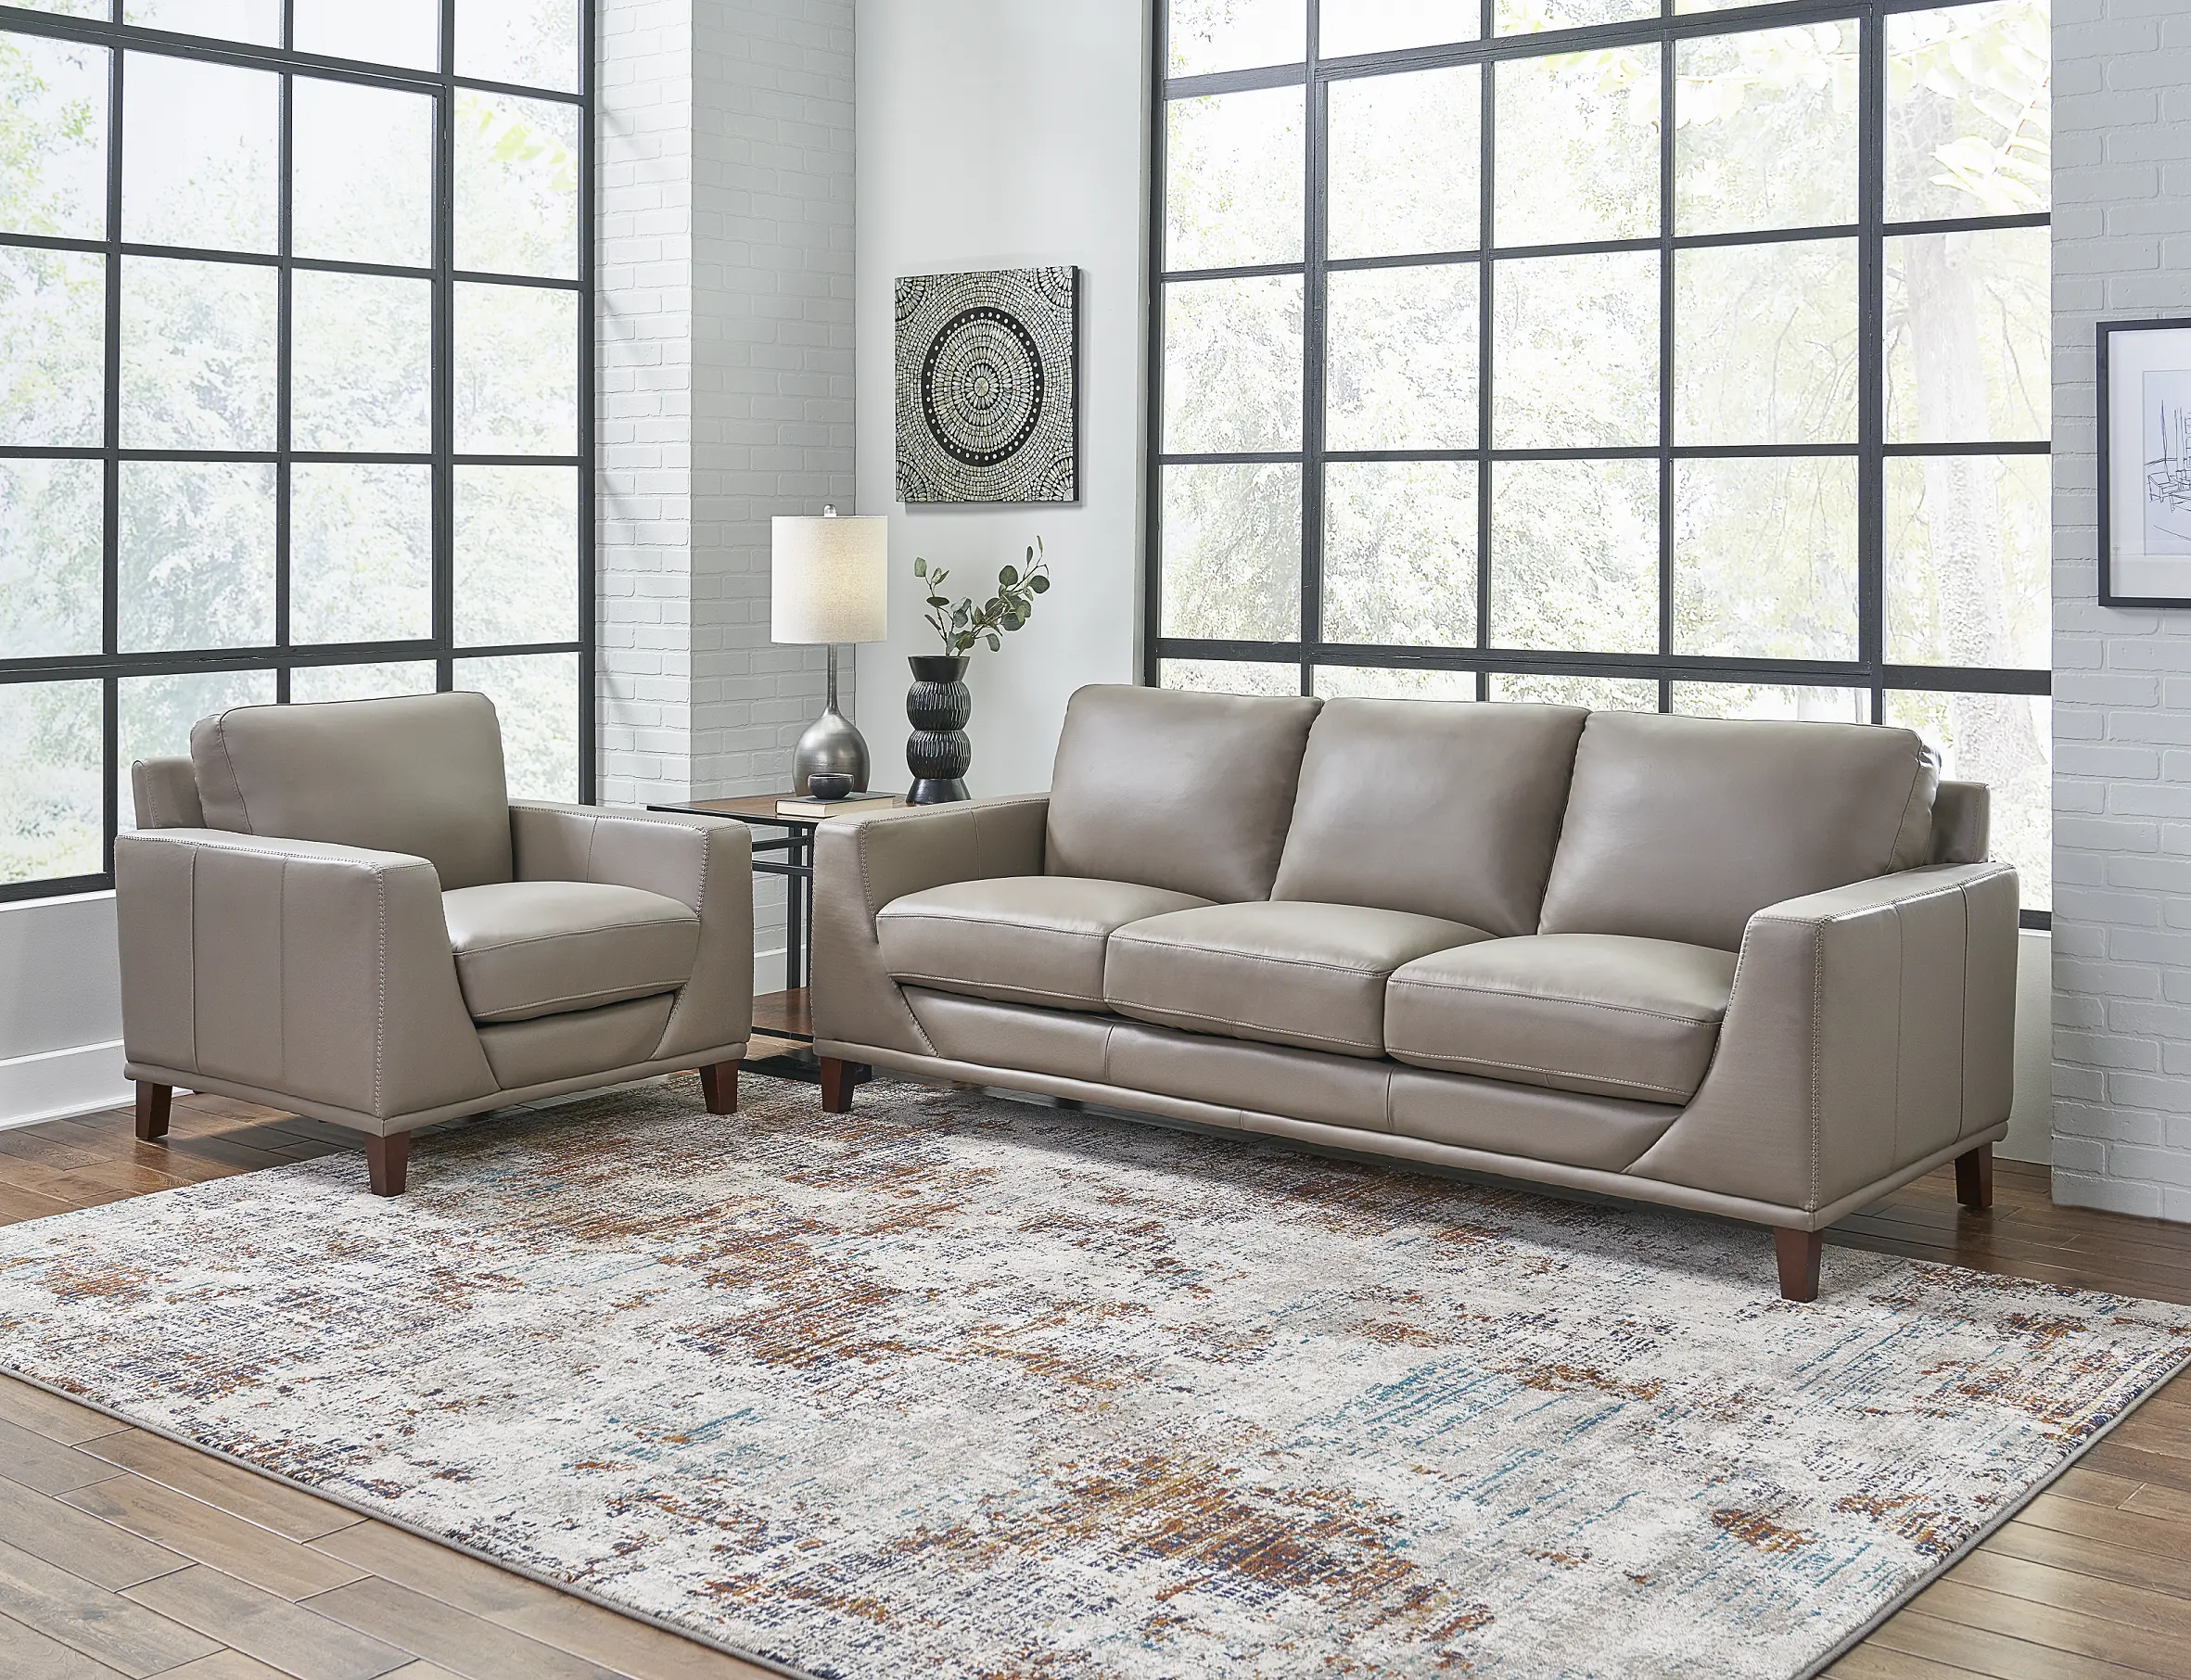 6702-SC-2518 Sonoma Taupe Leather 2 Piece Sofa and Chair Set -  sku 6702-SC-2518